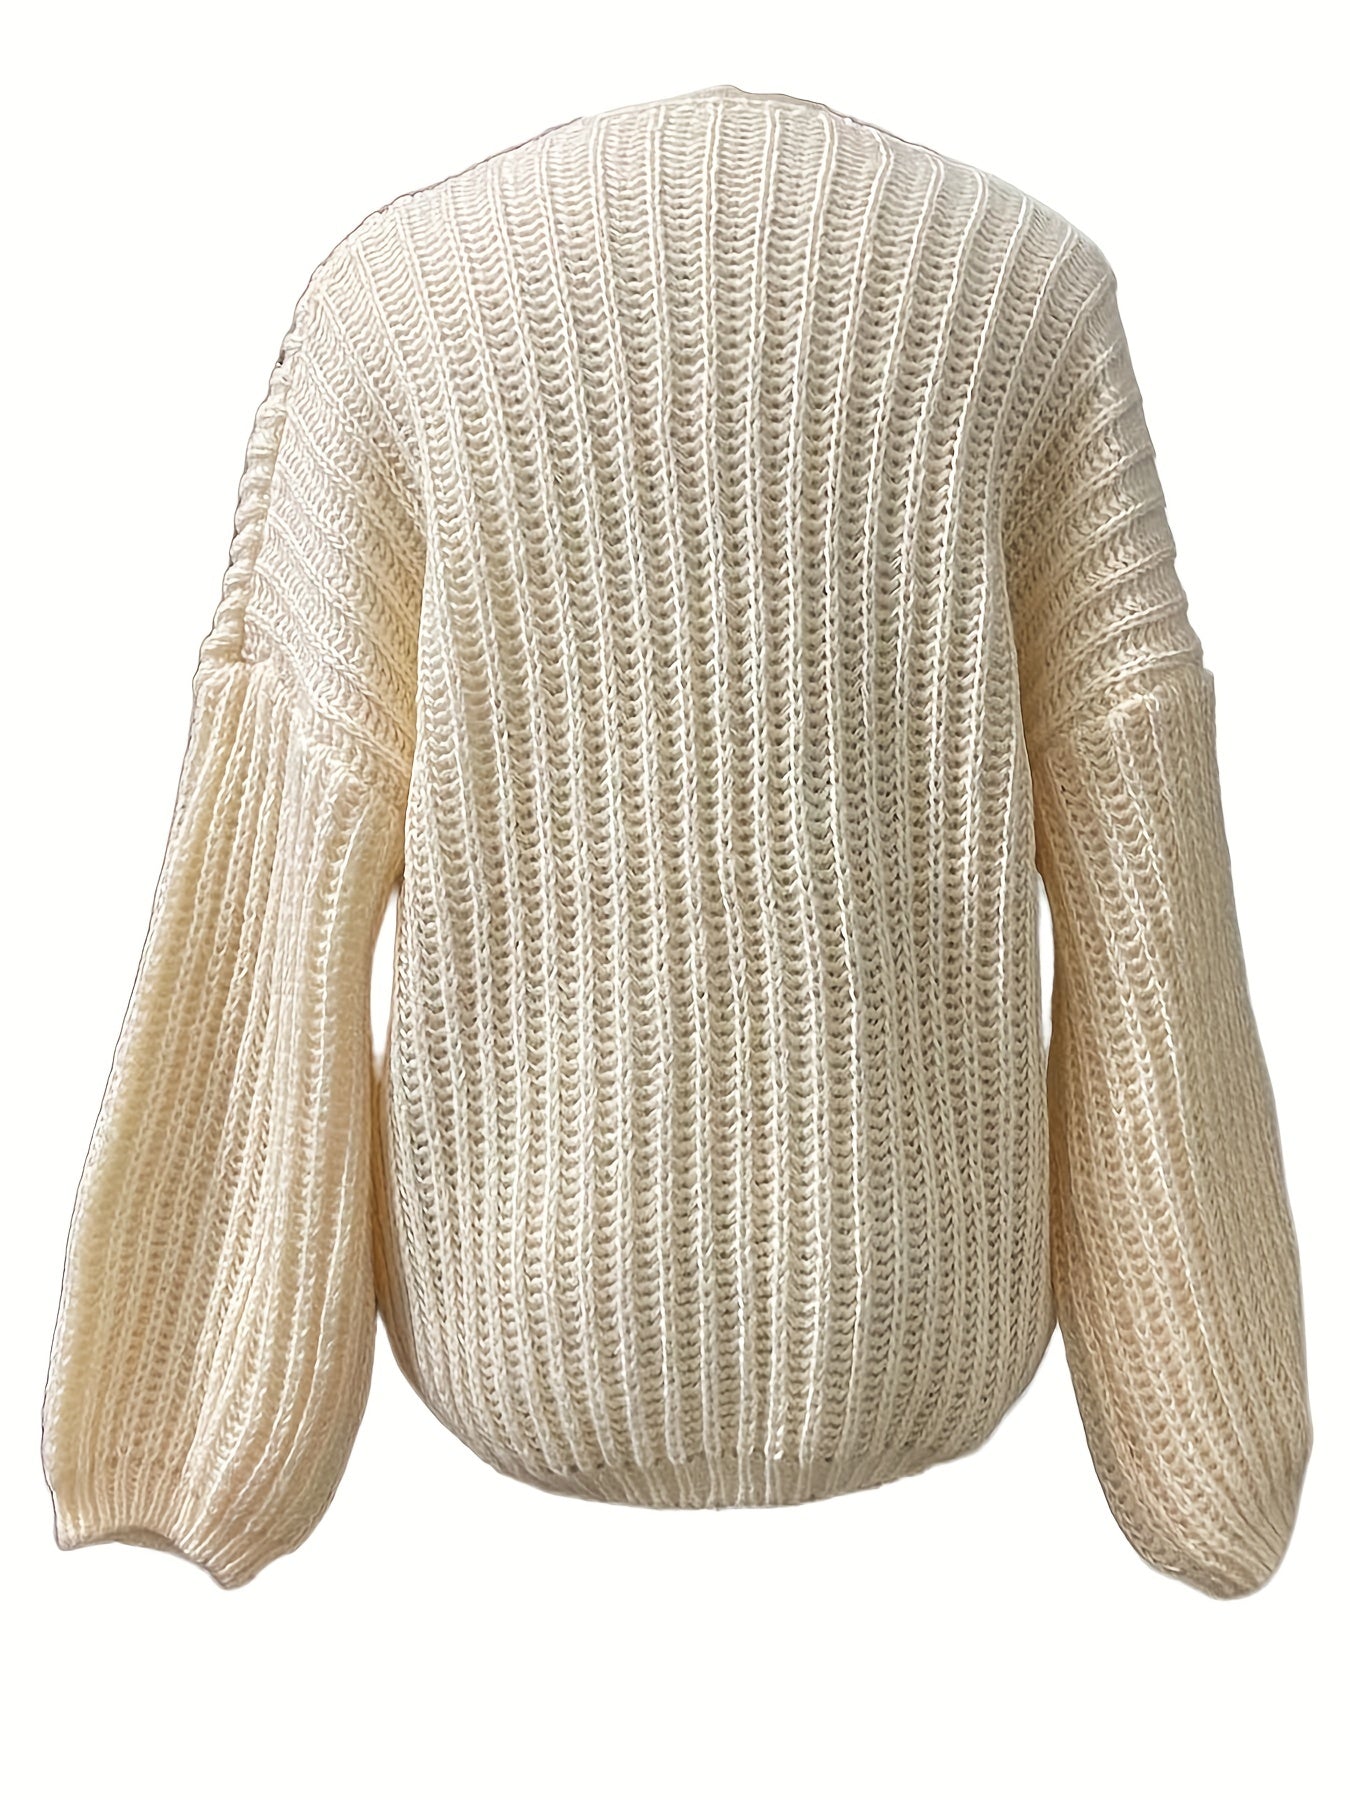 Antmvs Solid Open Front Knit Cardigan, Casual Long Sleeve Loose Slouchy Sweater, Women's Clothing